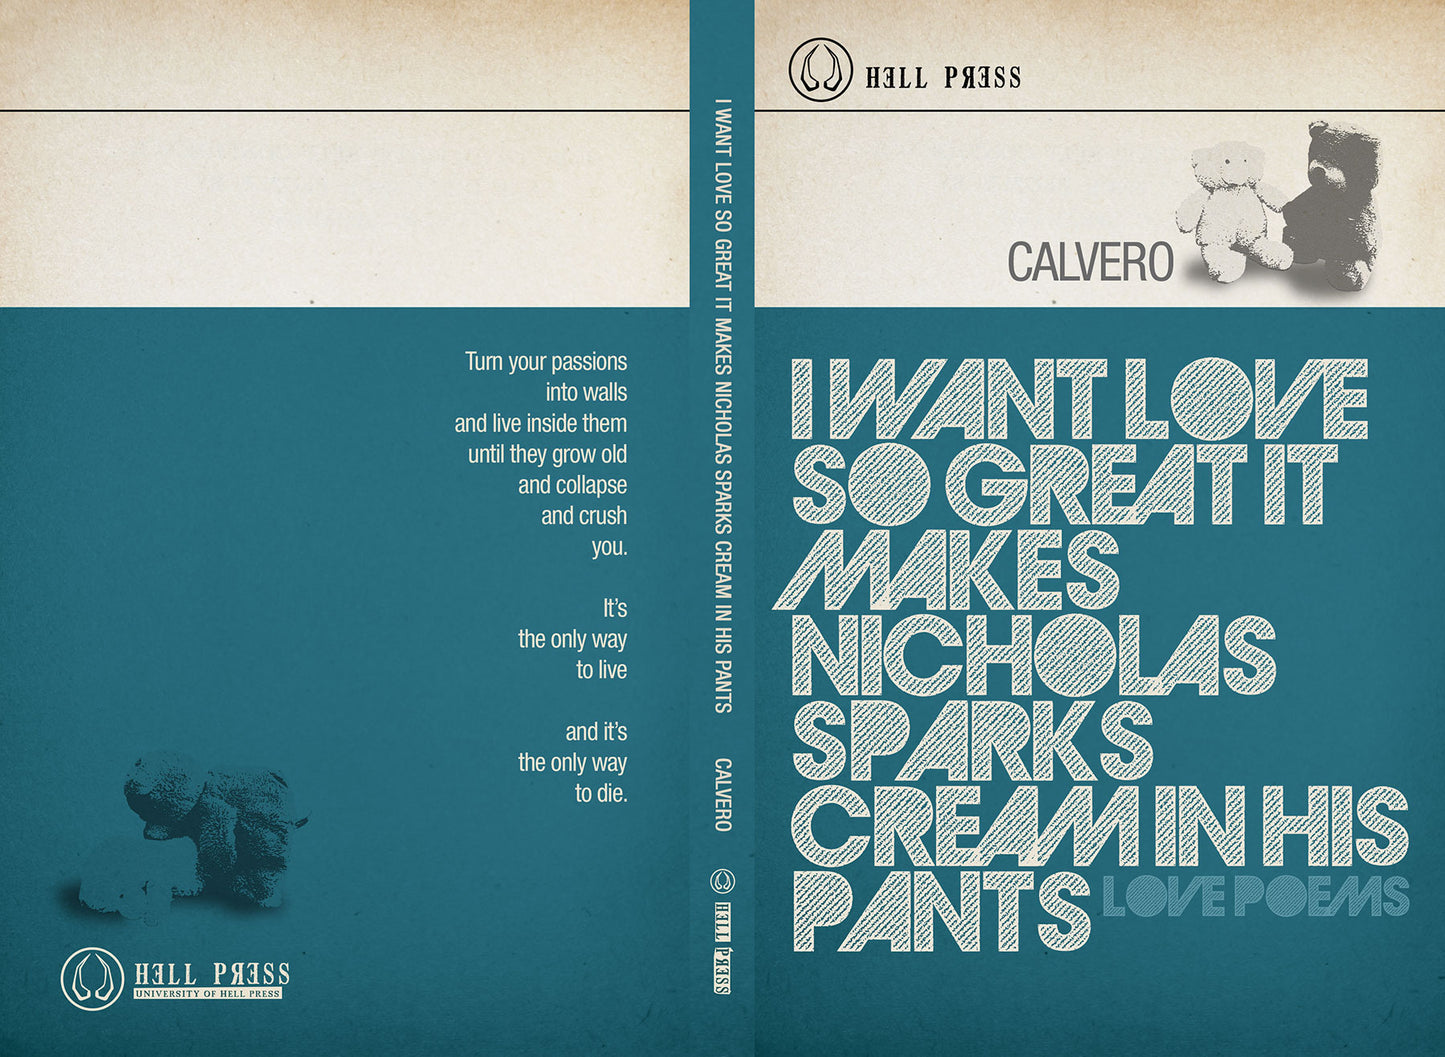 i want love so great it makes Nicholas Sparks cream in his pants by Calvero